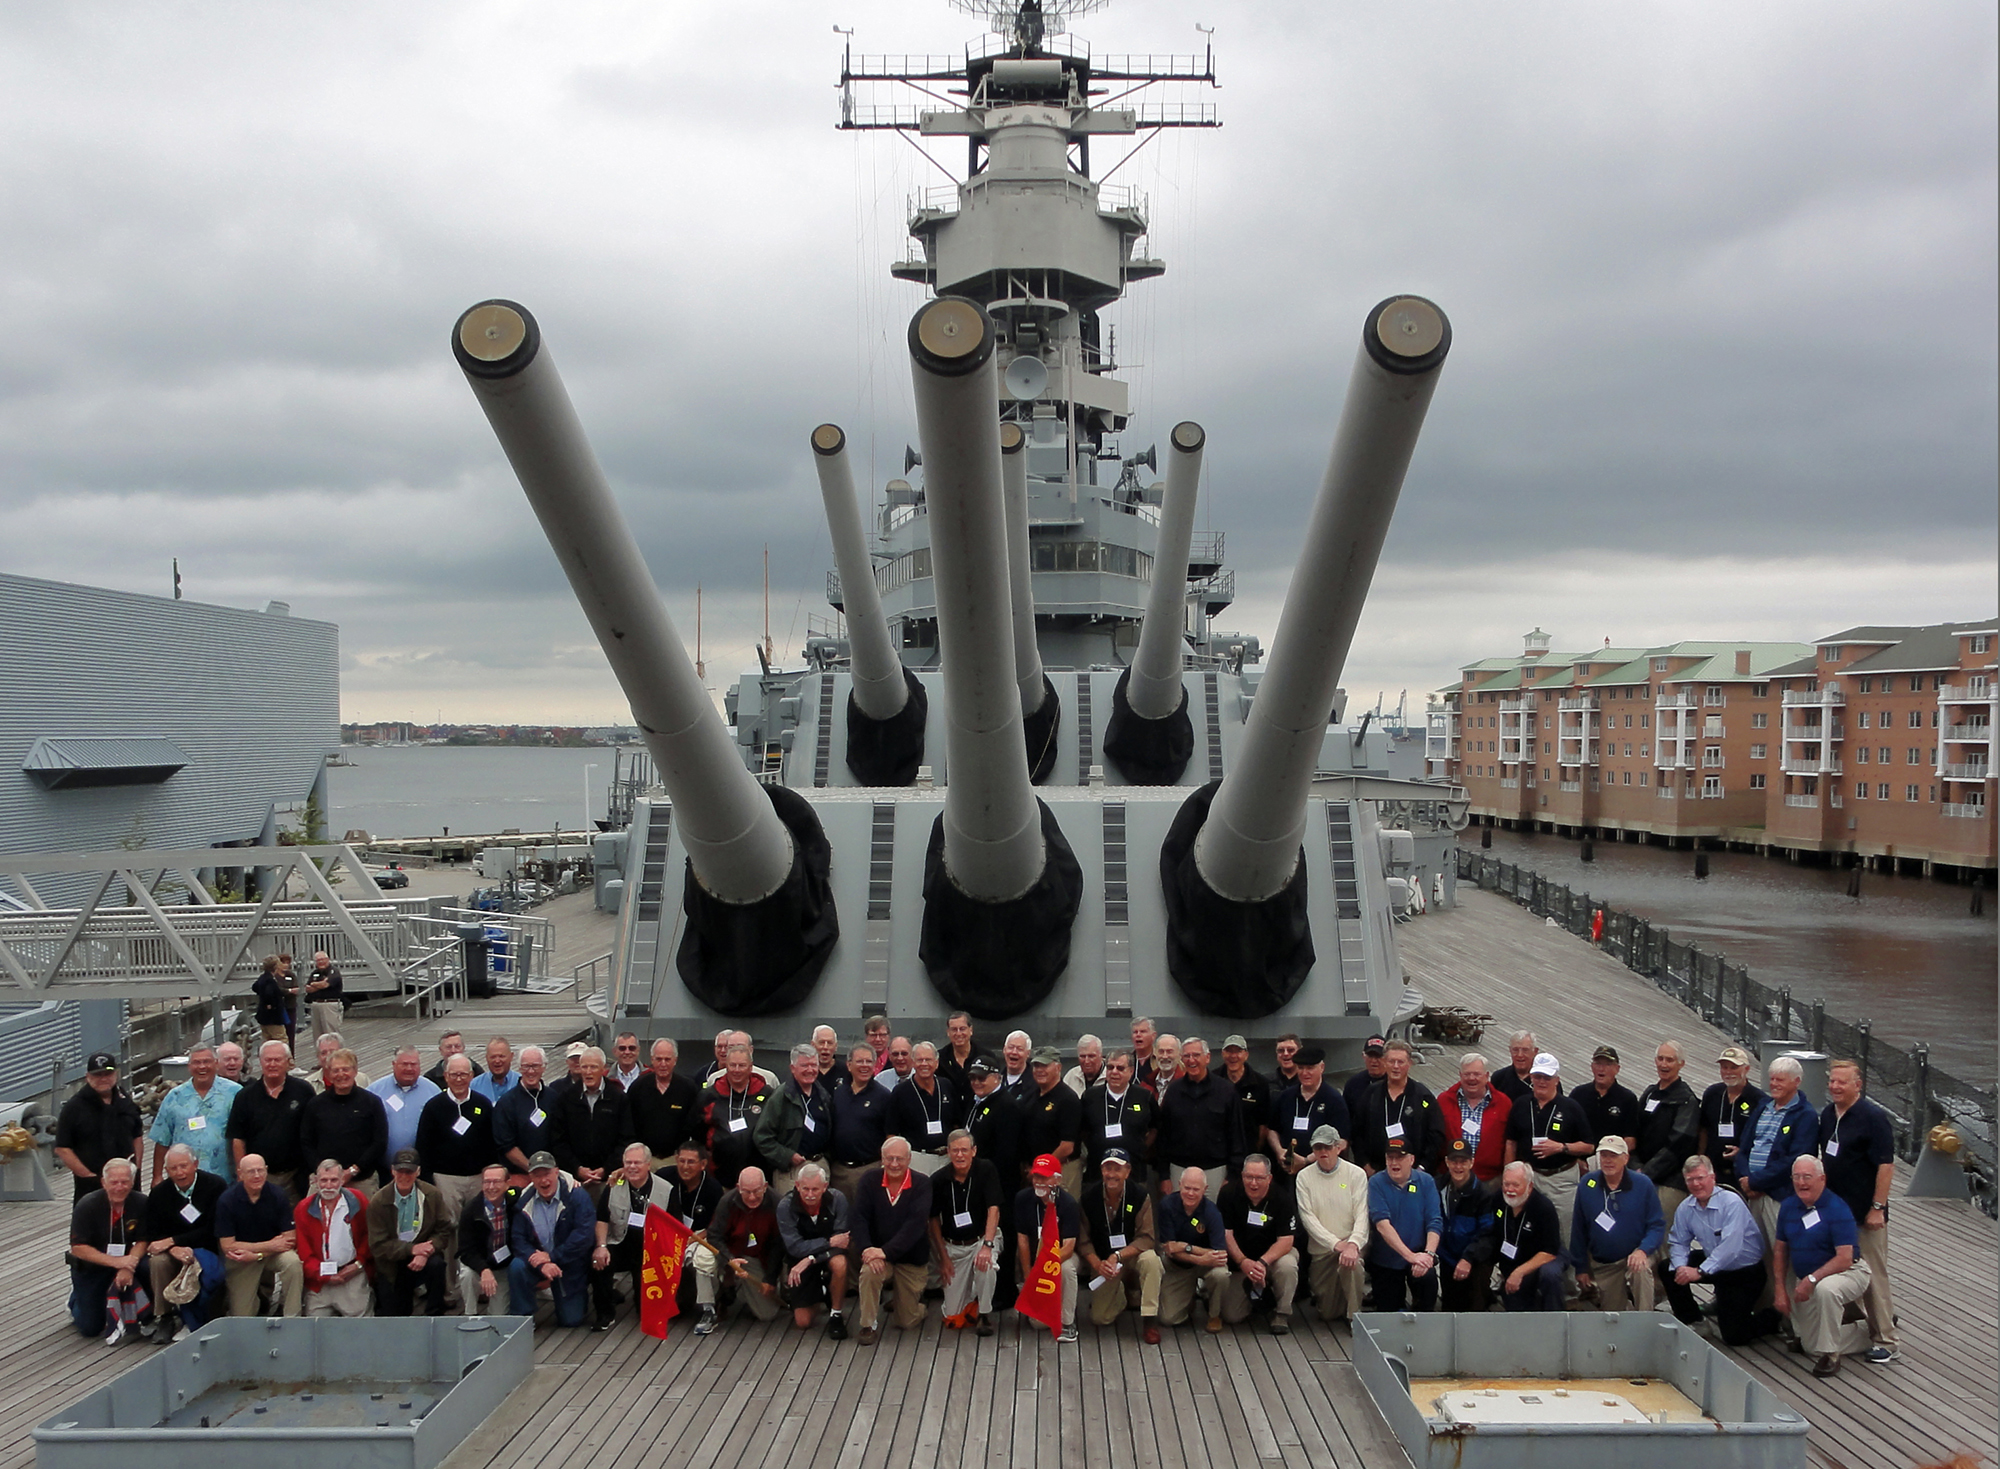 Group photo on the USS Wisconsin